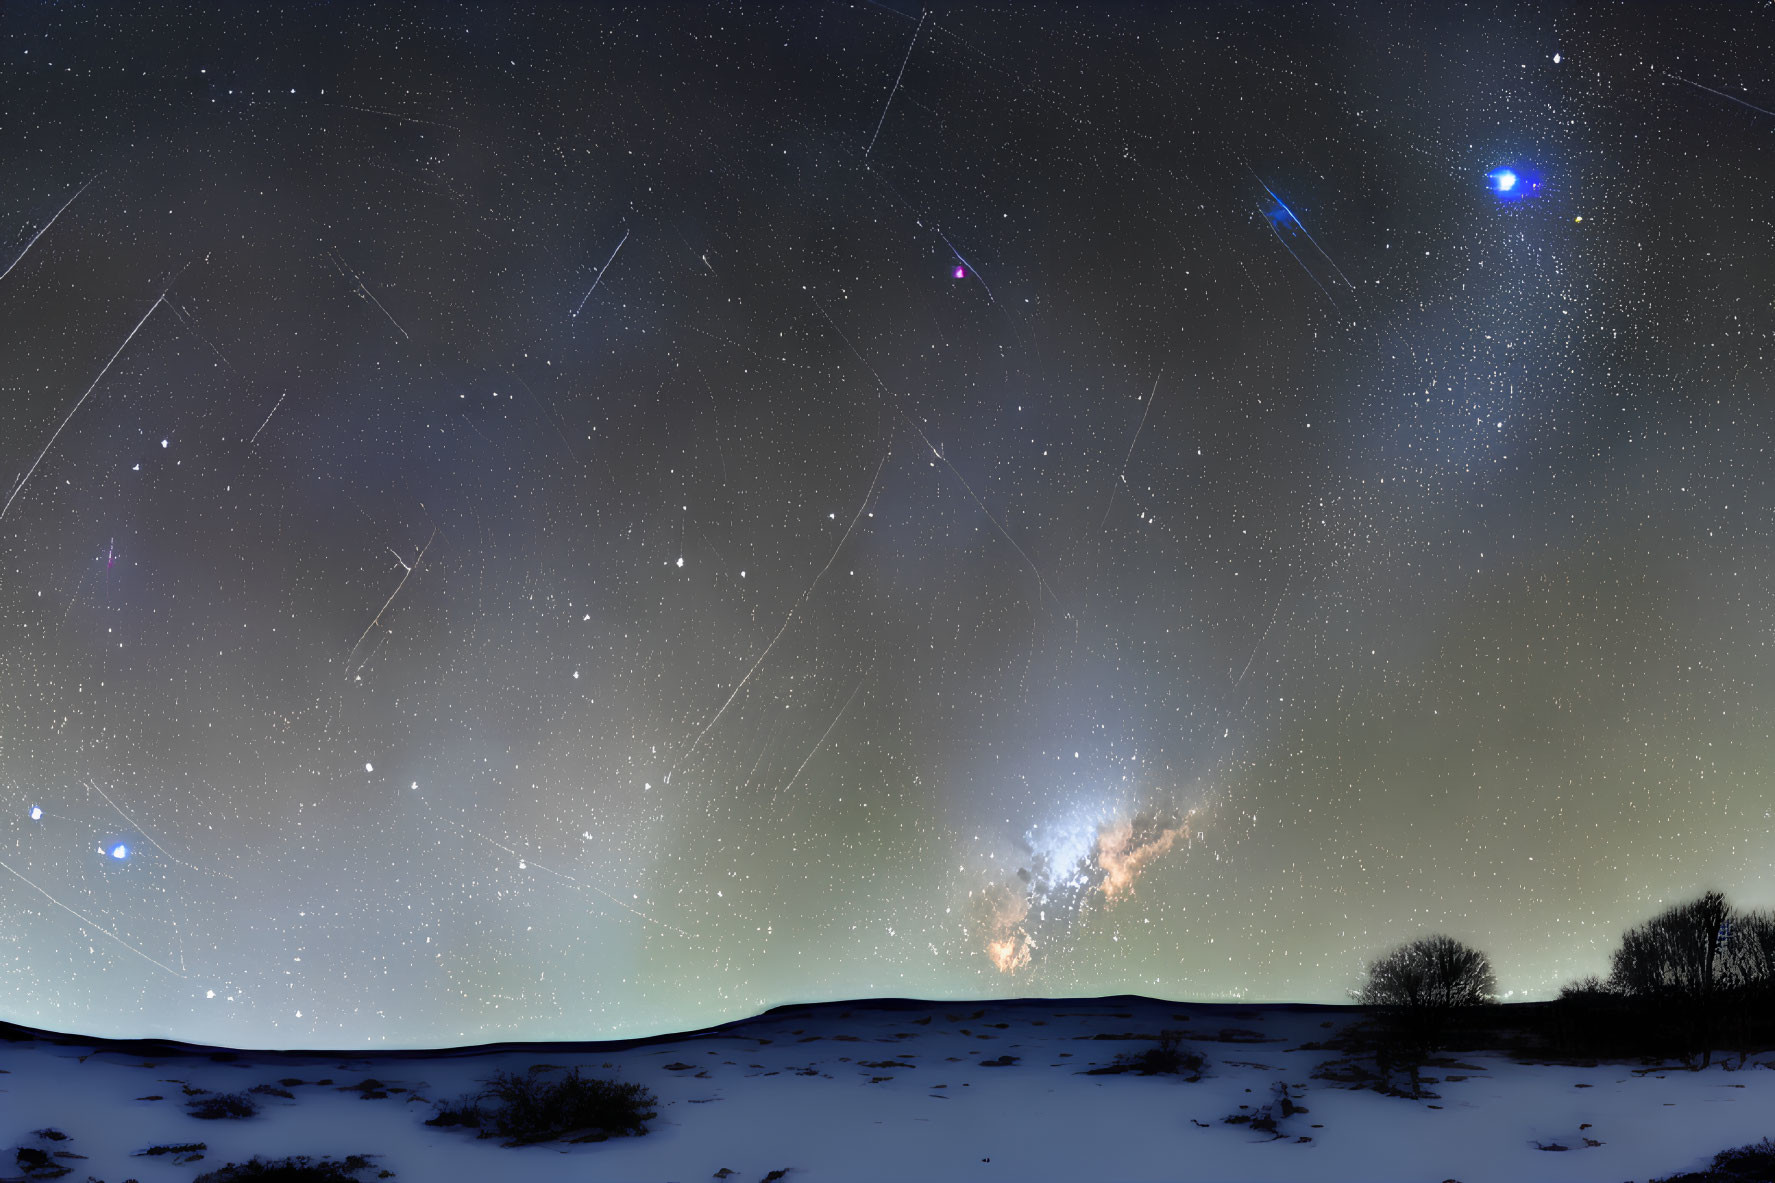 Panoramic night sky with meteor trails, Milky Way, stars, and snow-covered landscape